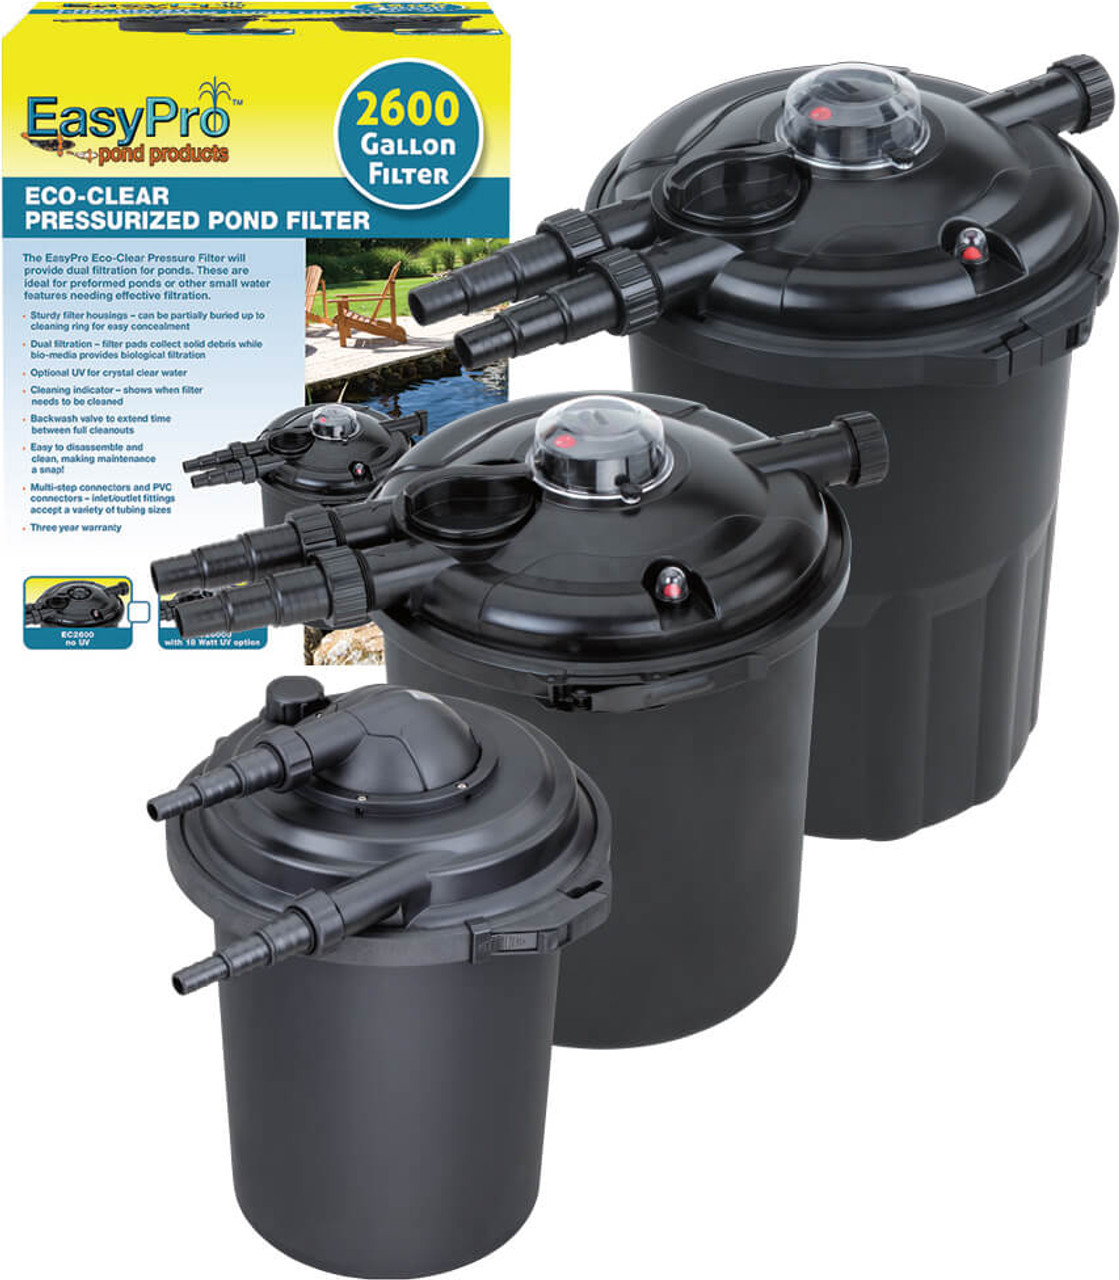 EasyPro EC1300 Eco-Clear Pressurized Filter without UV - up to 1300 Gal. (FREE SHIPPING)